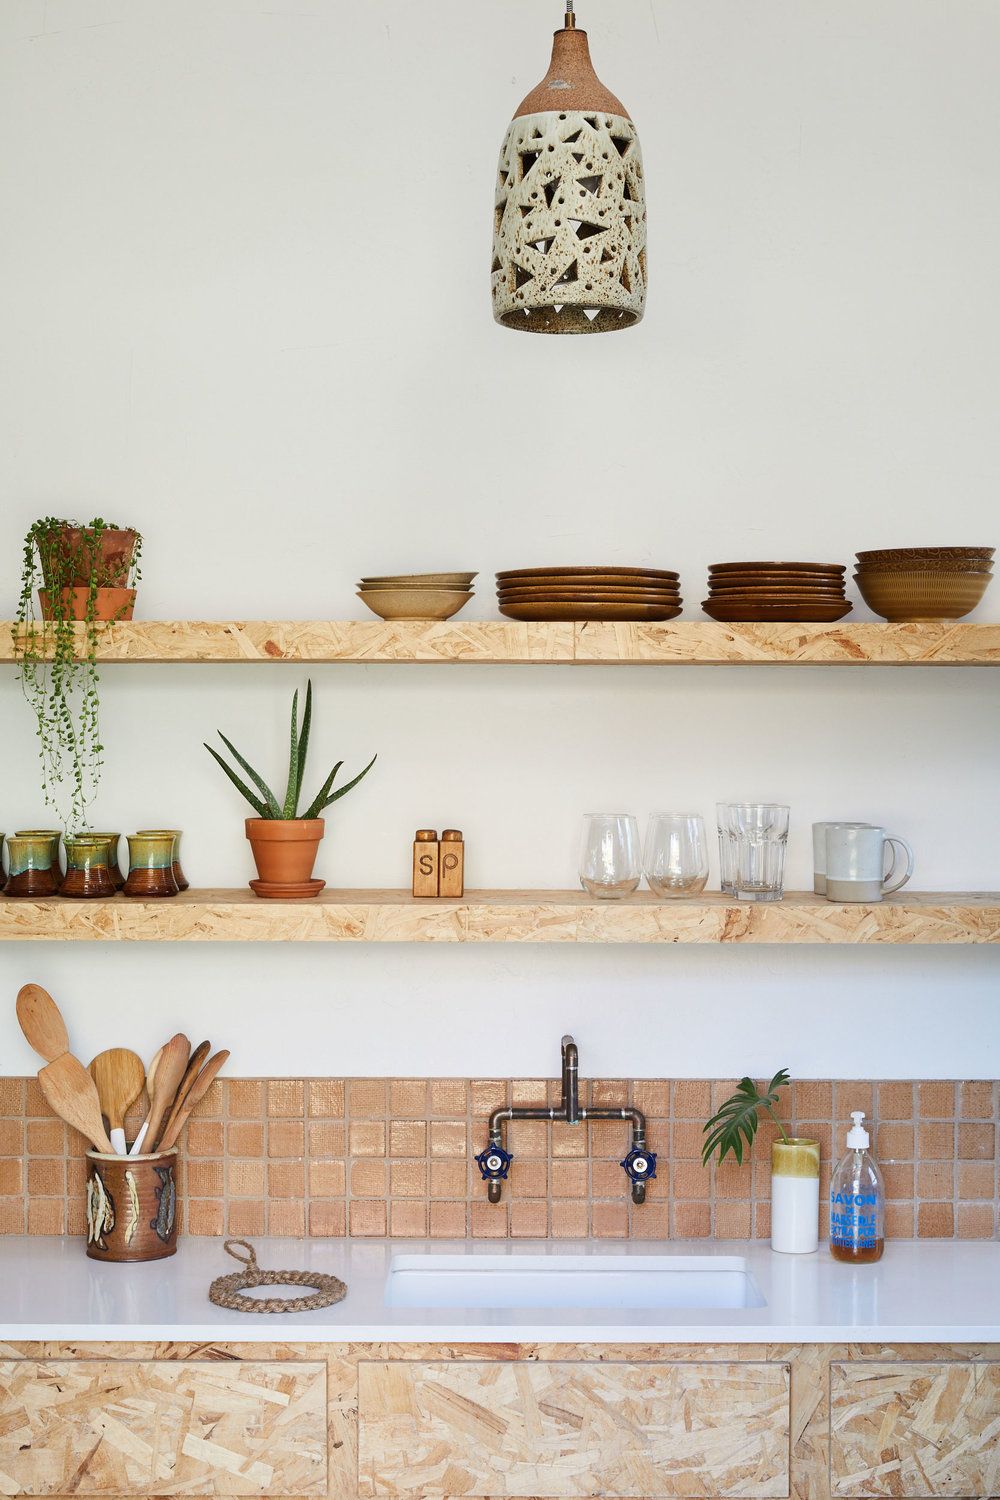 Open Shelving These 15 Kitchens, Kitchen Wall Shelves Instead Of Cabinets